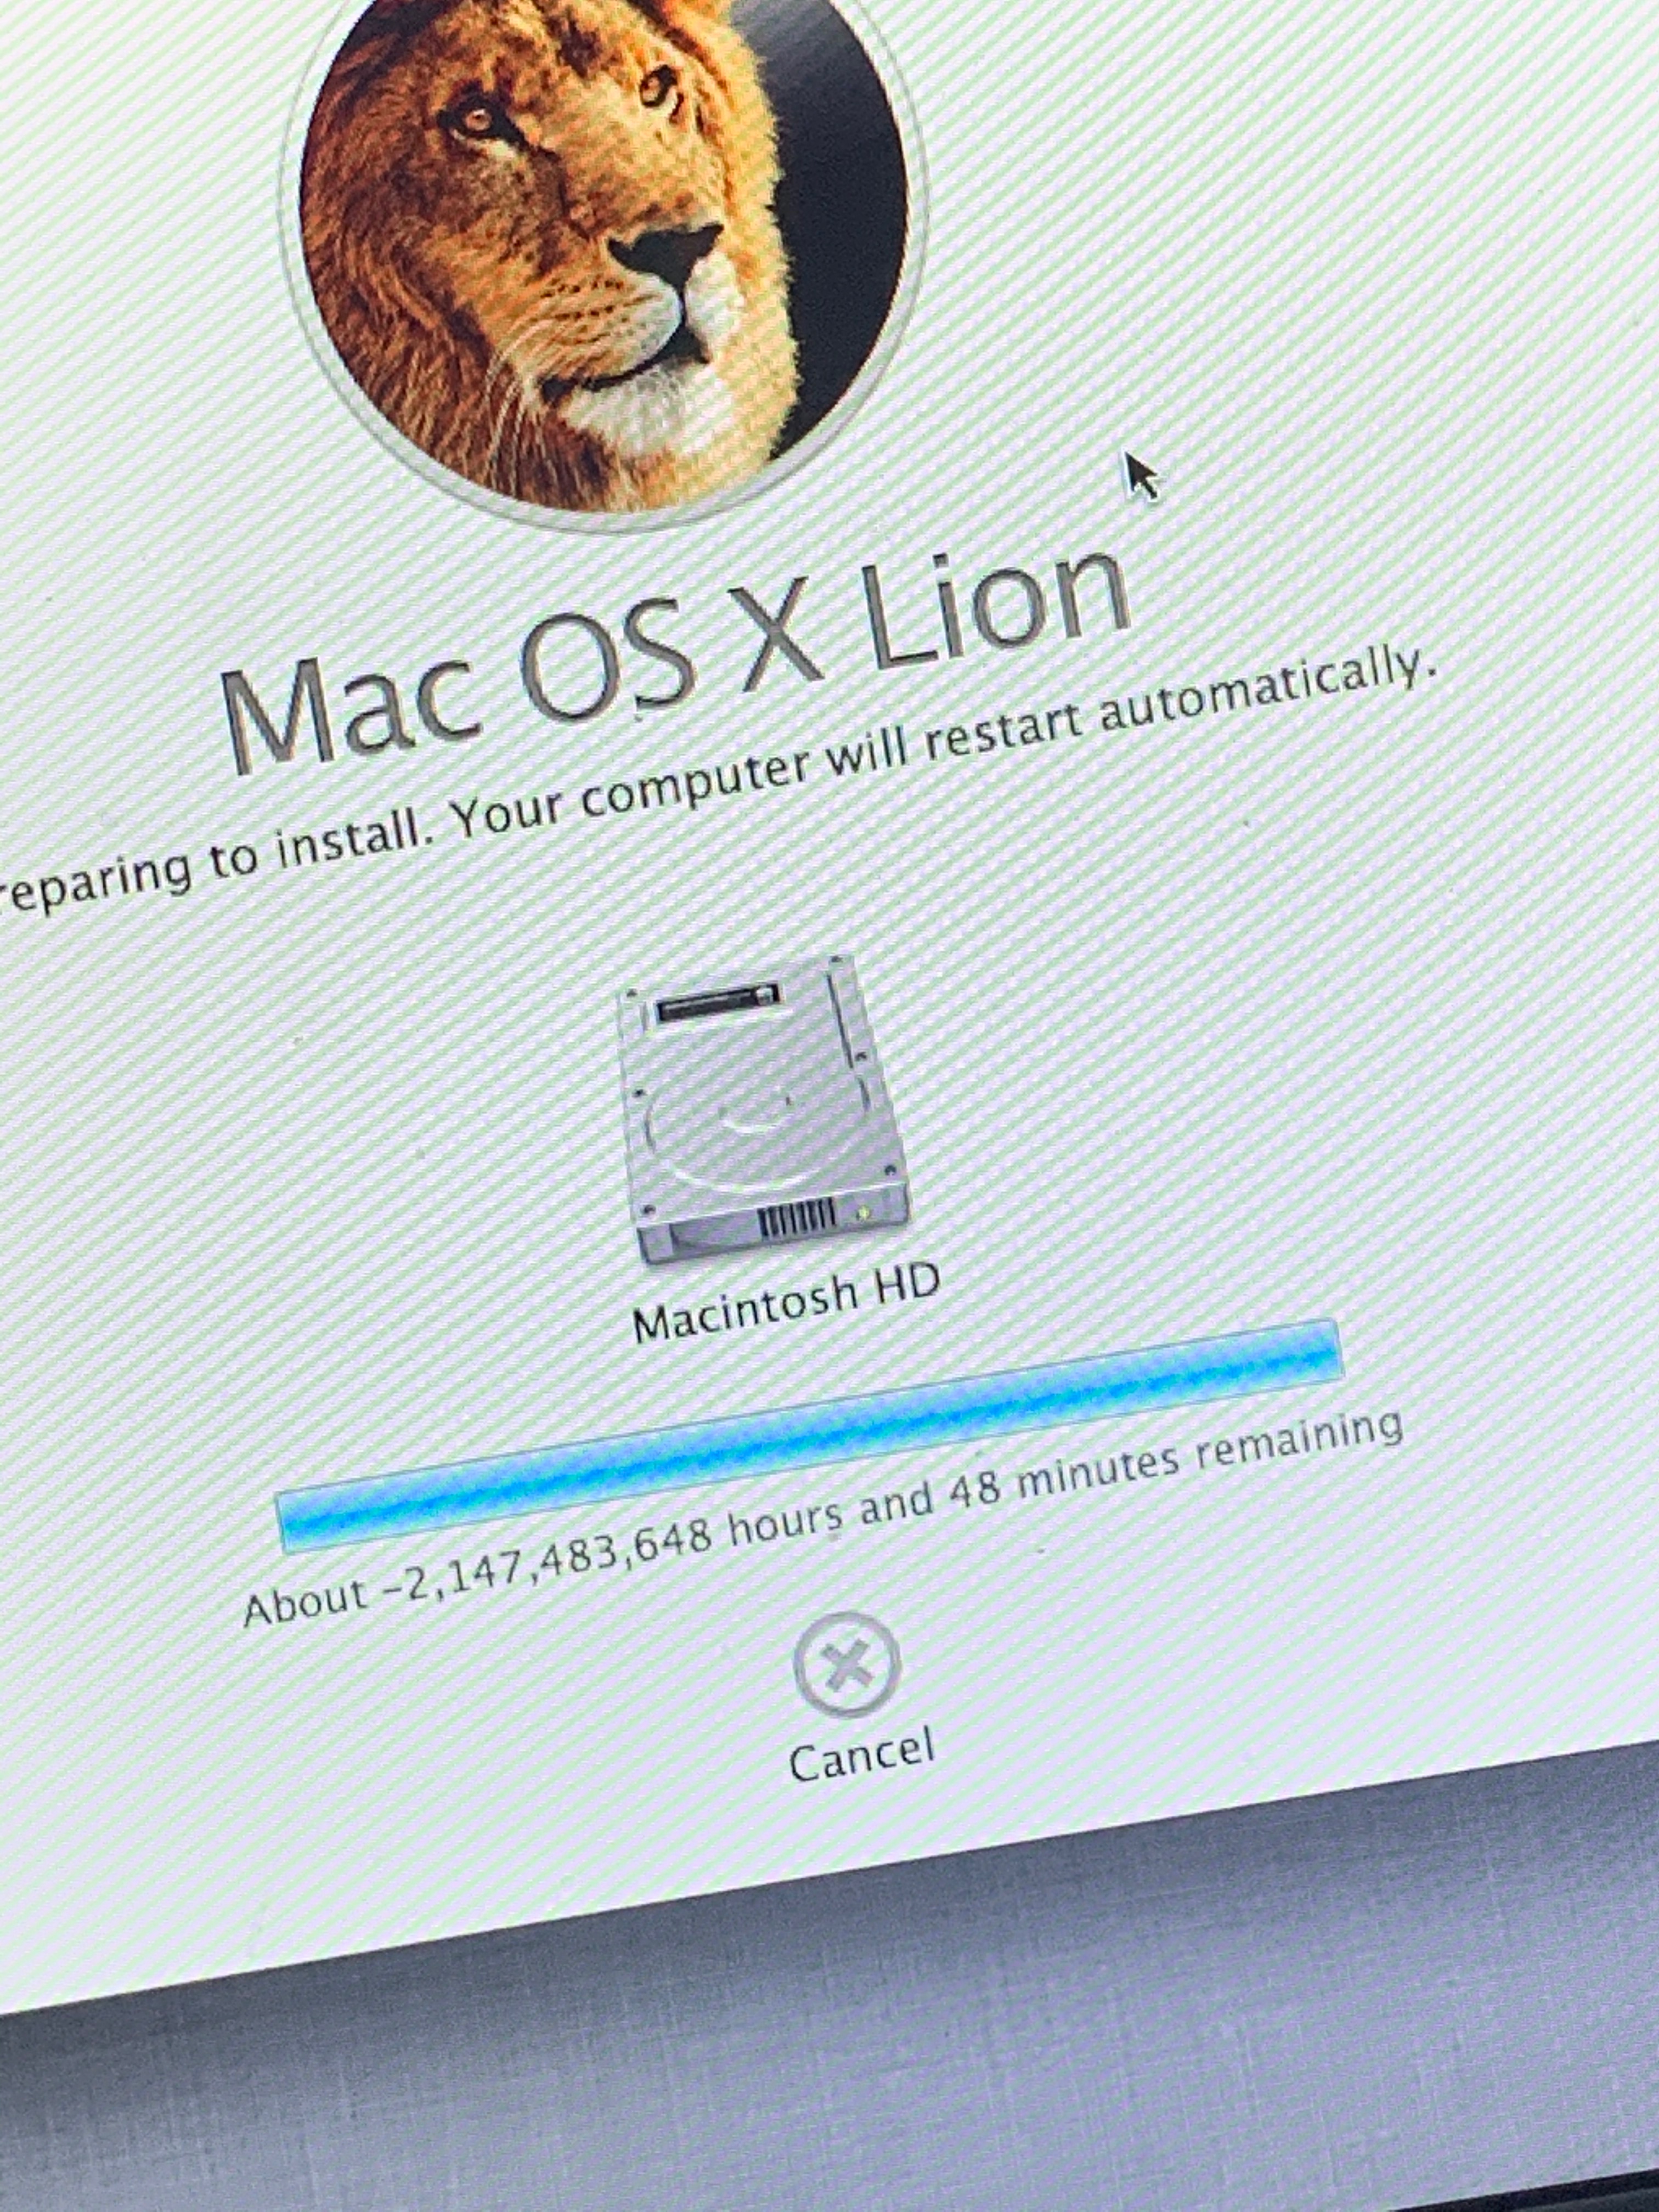 cant download mac os x lion